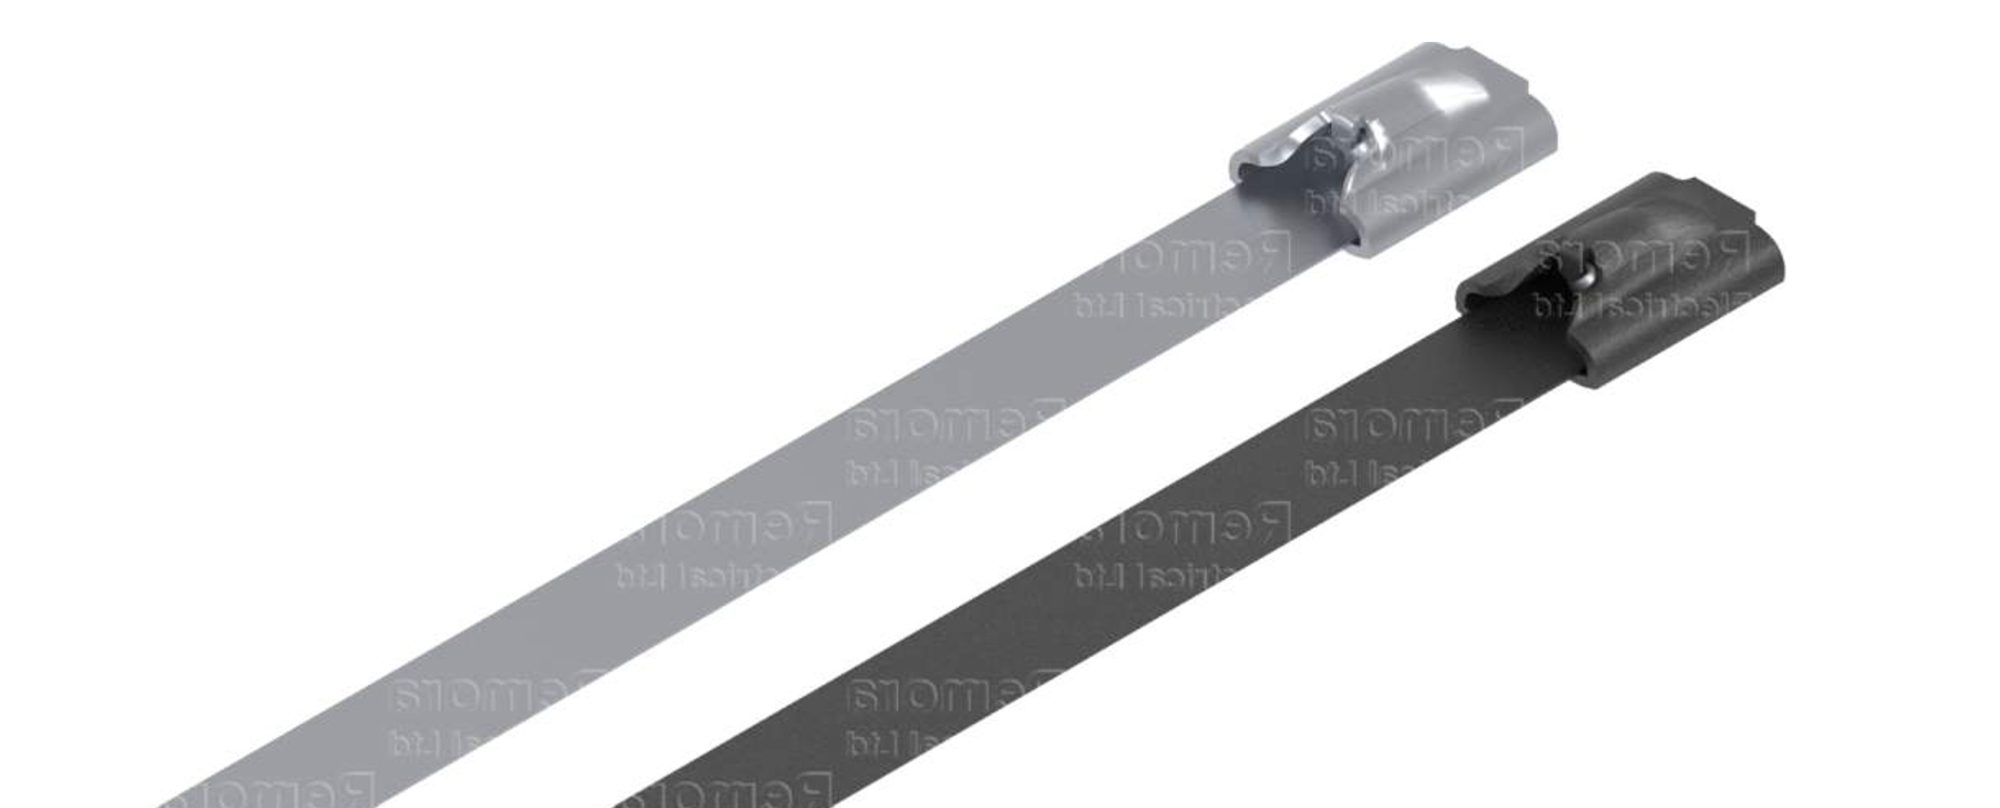 cable ties stainless